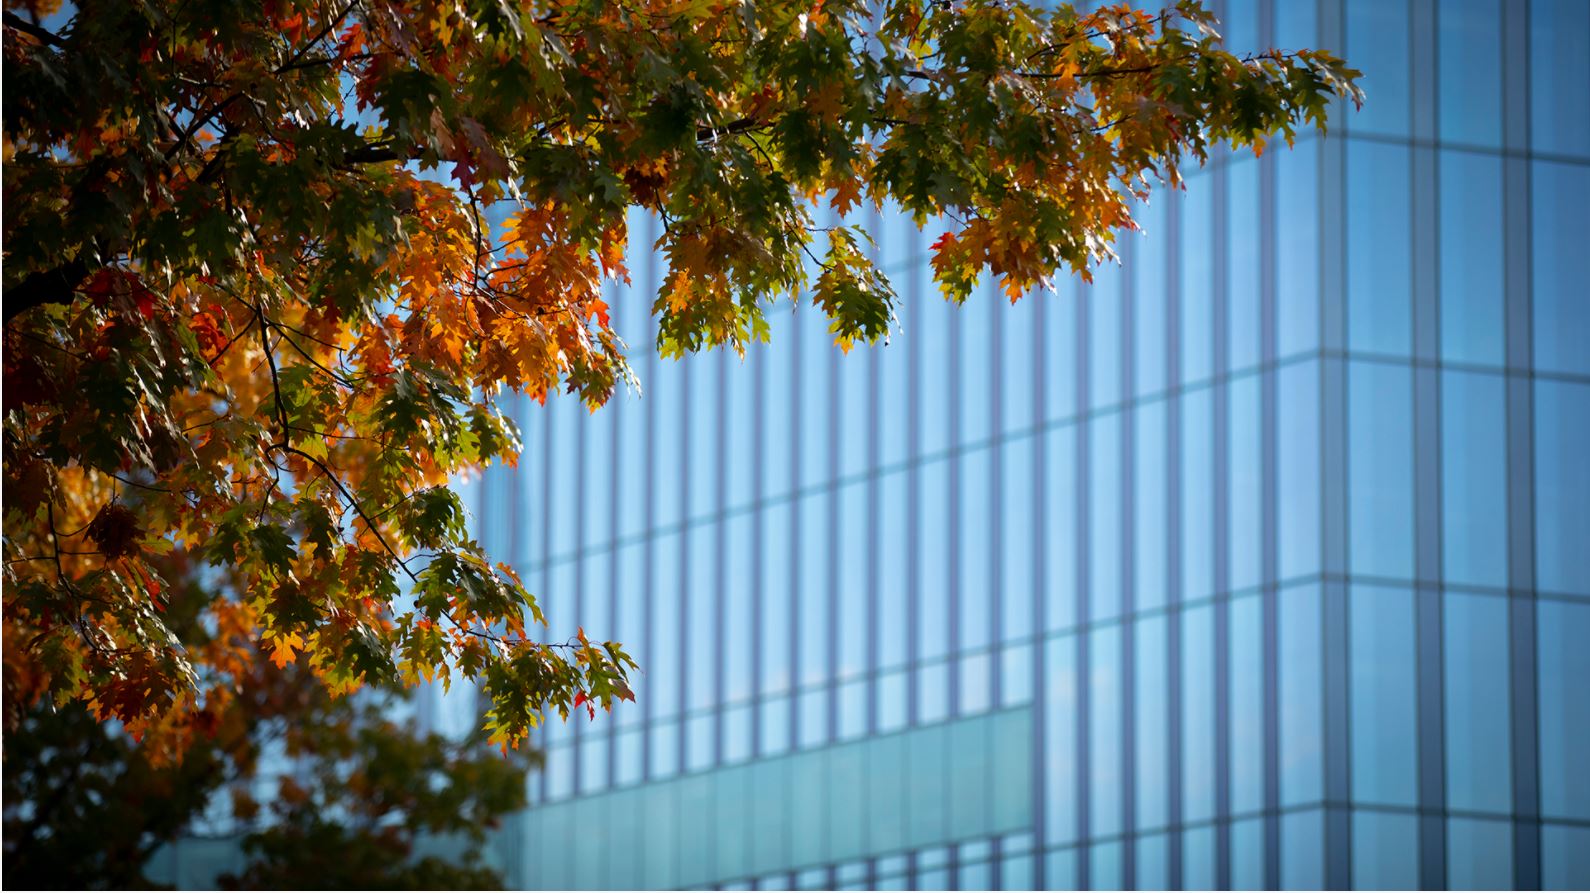 CVM building in distance with autumn leaves in foreground